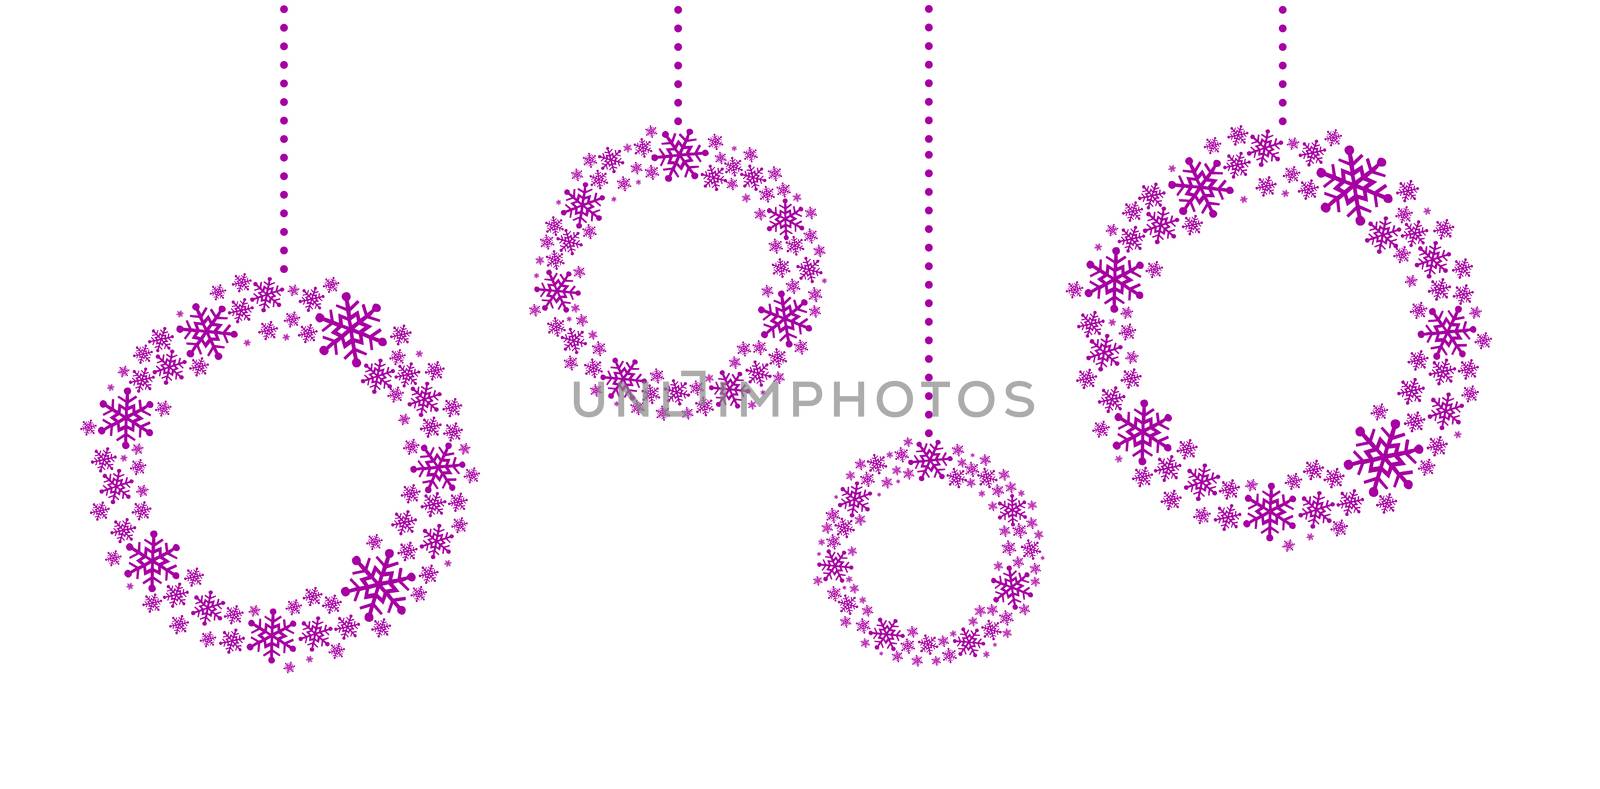 Christmas frames from snowflakes on white background with place for text by timonko